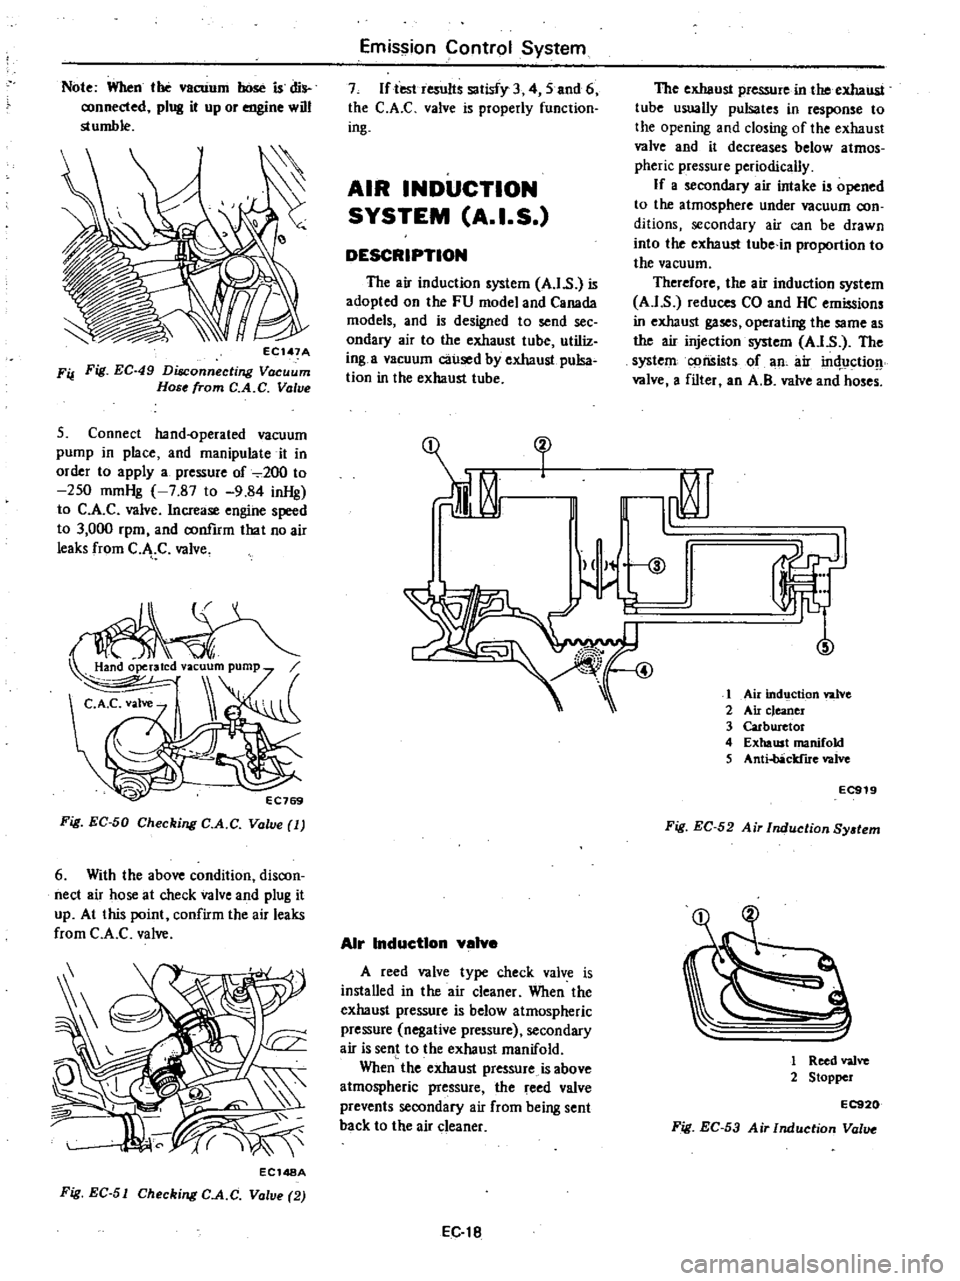 DATSUN 210 1979 User Guide 
Note 
When 
tho 
vaCUUm 
hose

is 
dis

connected

plug 
it

up 
or

engine 
will

stumble

EC 
47A

FiJ 
Fig 
EC 
49

Disconnecting 
Vacuum

Hose

from 
C 
A

C 
Valve

5

Connect

hand
operated 
va